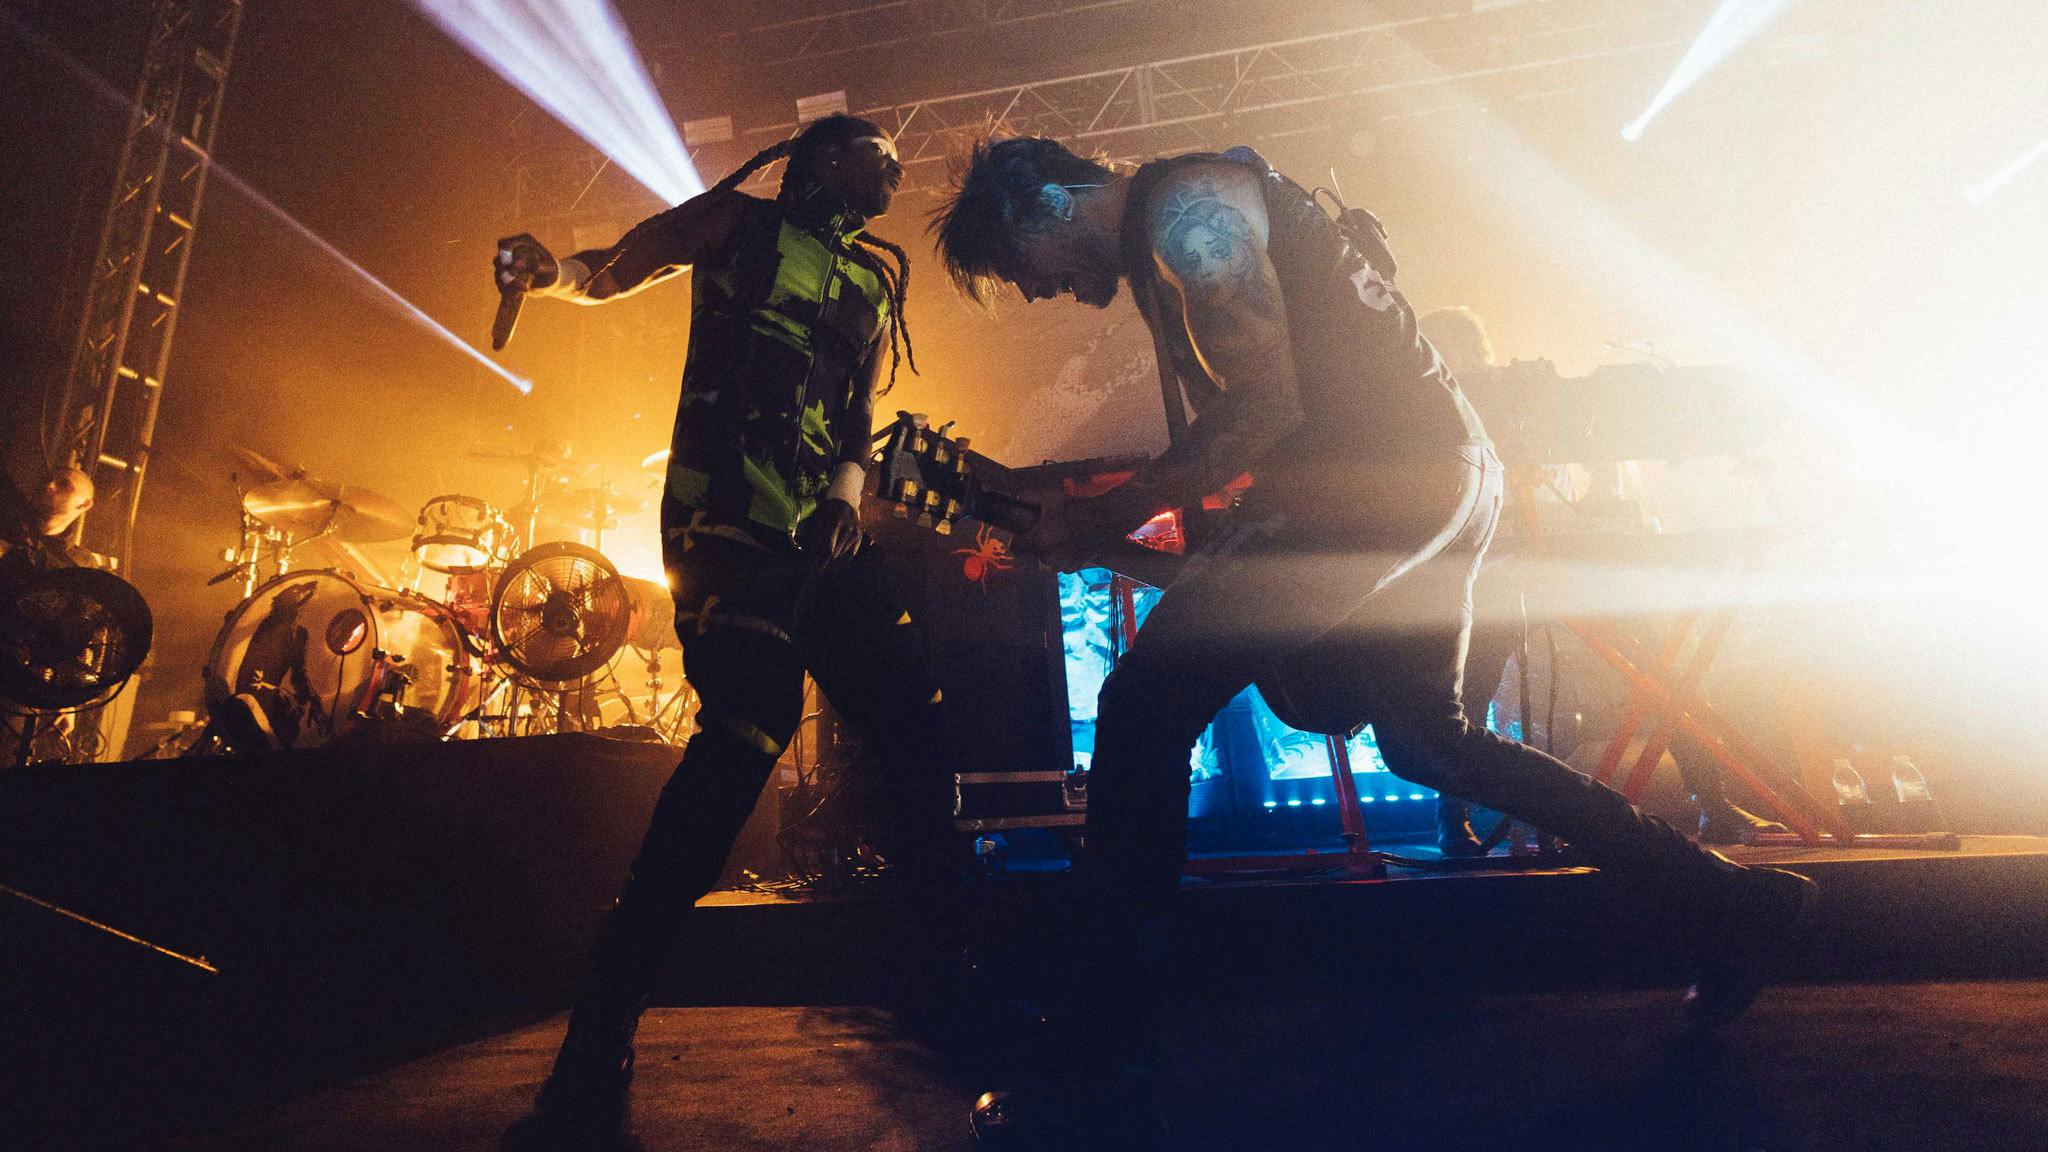 Live review: The Prodigy, O2 Academy Leeds